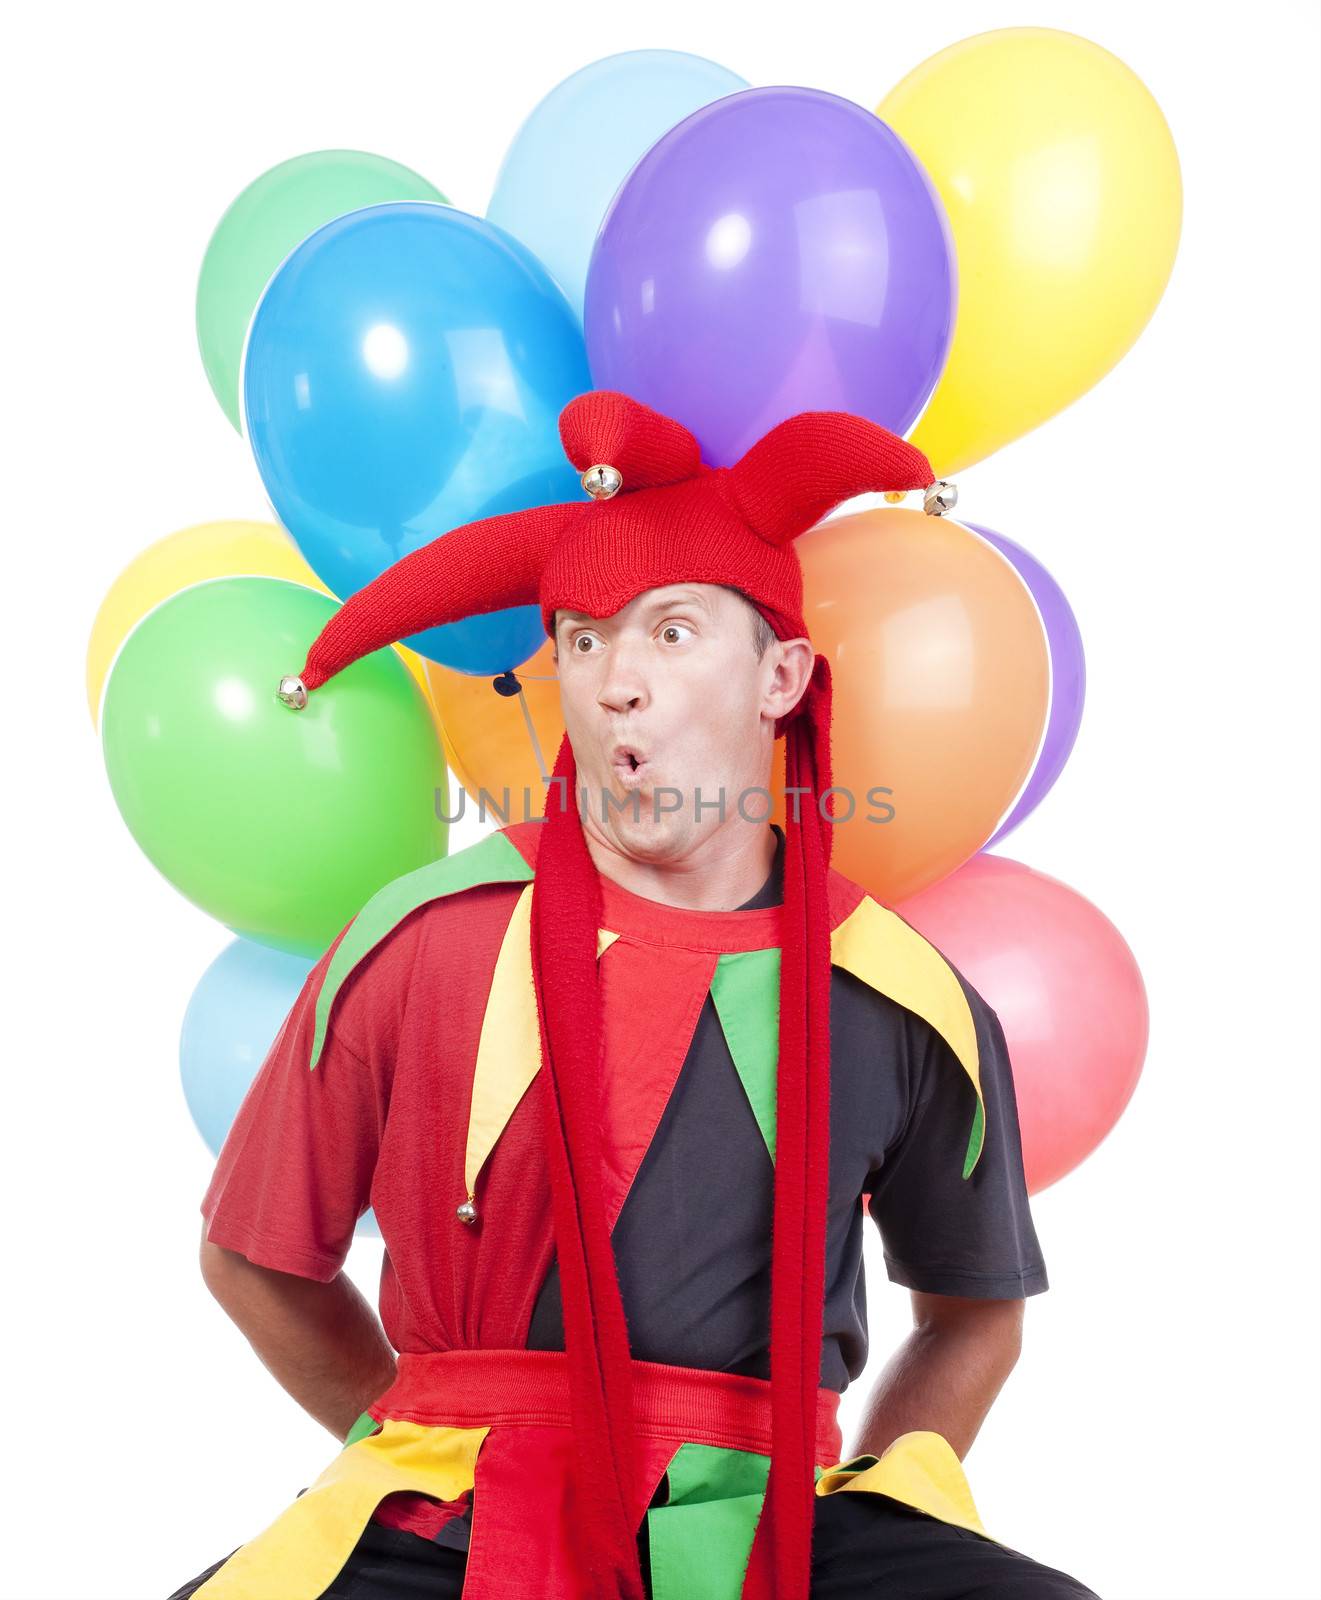 jester with balloons by courtyardpix